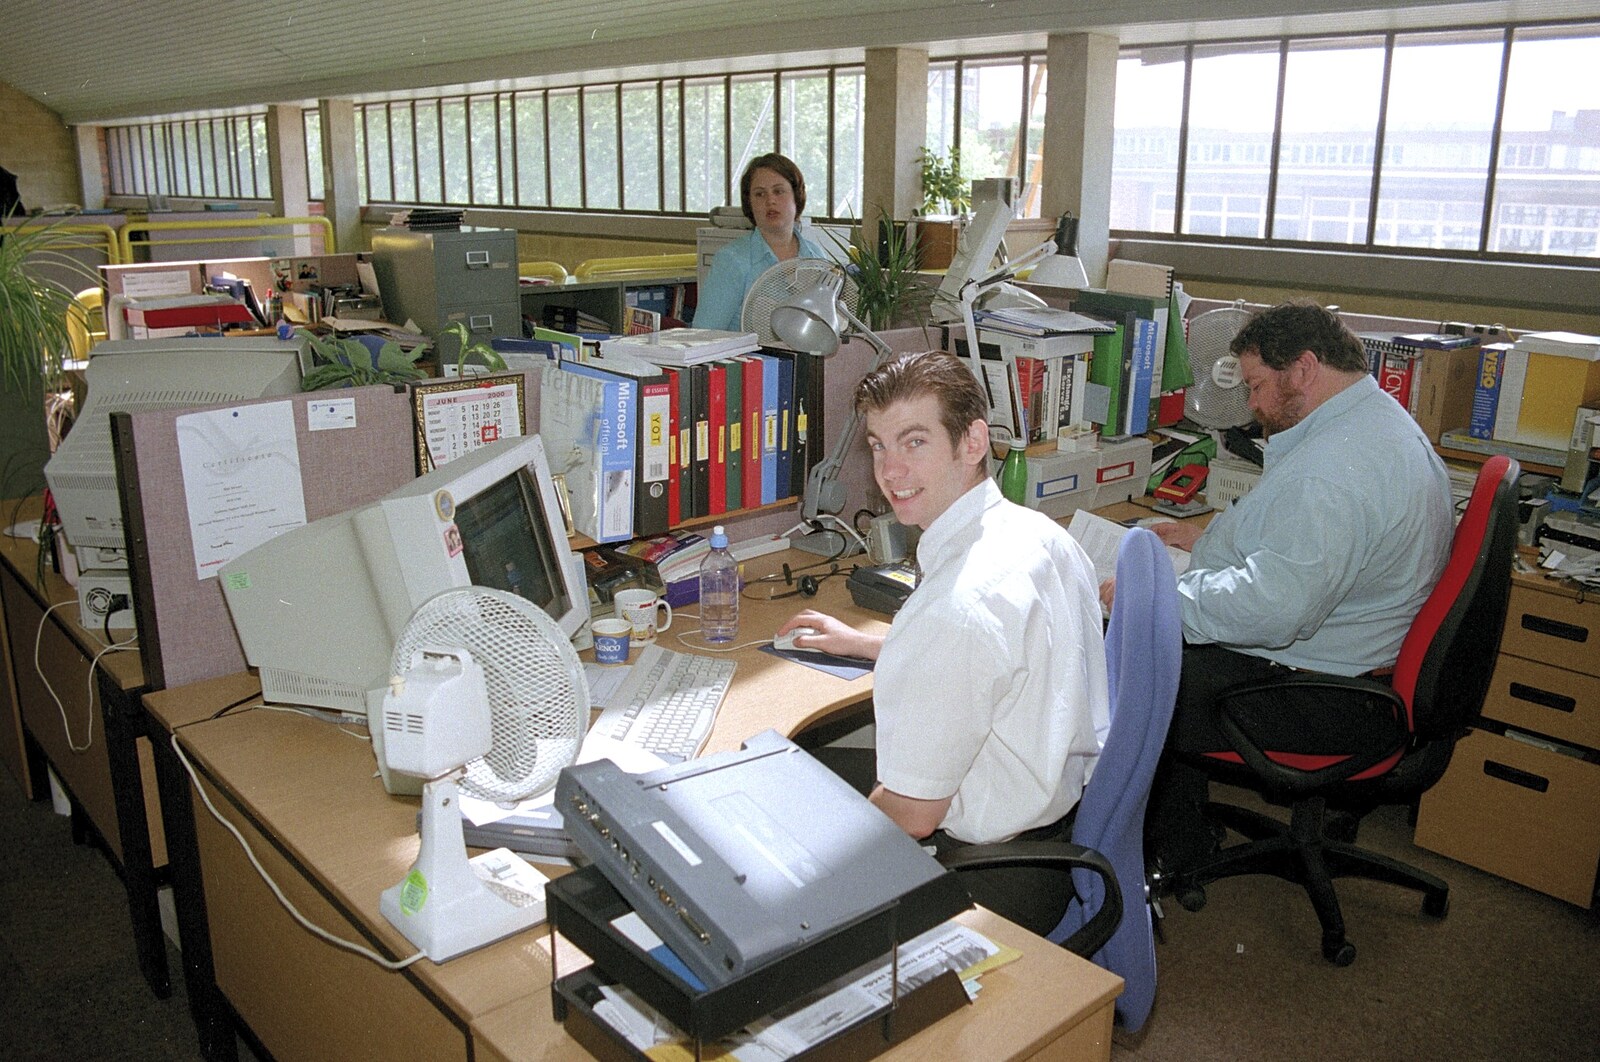 A Last Few Days at CISU, Suffolk County Council, Ipswich - 11th June 2000: More of the support department